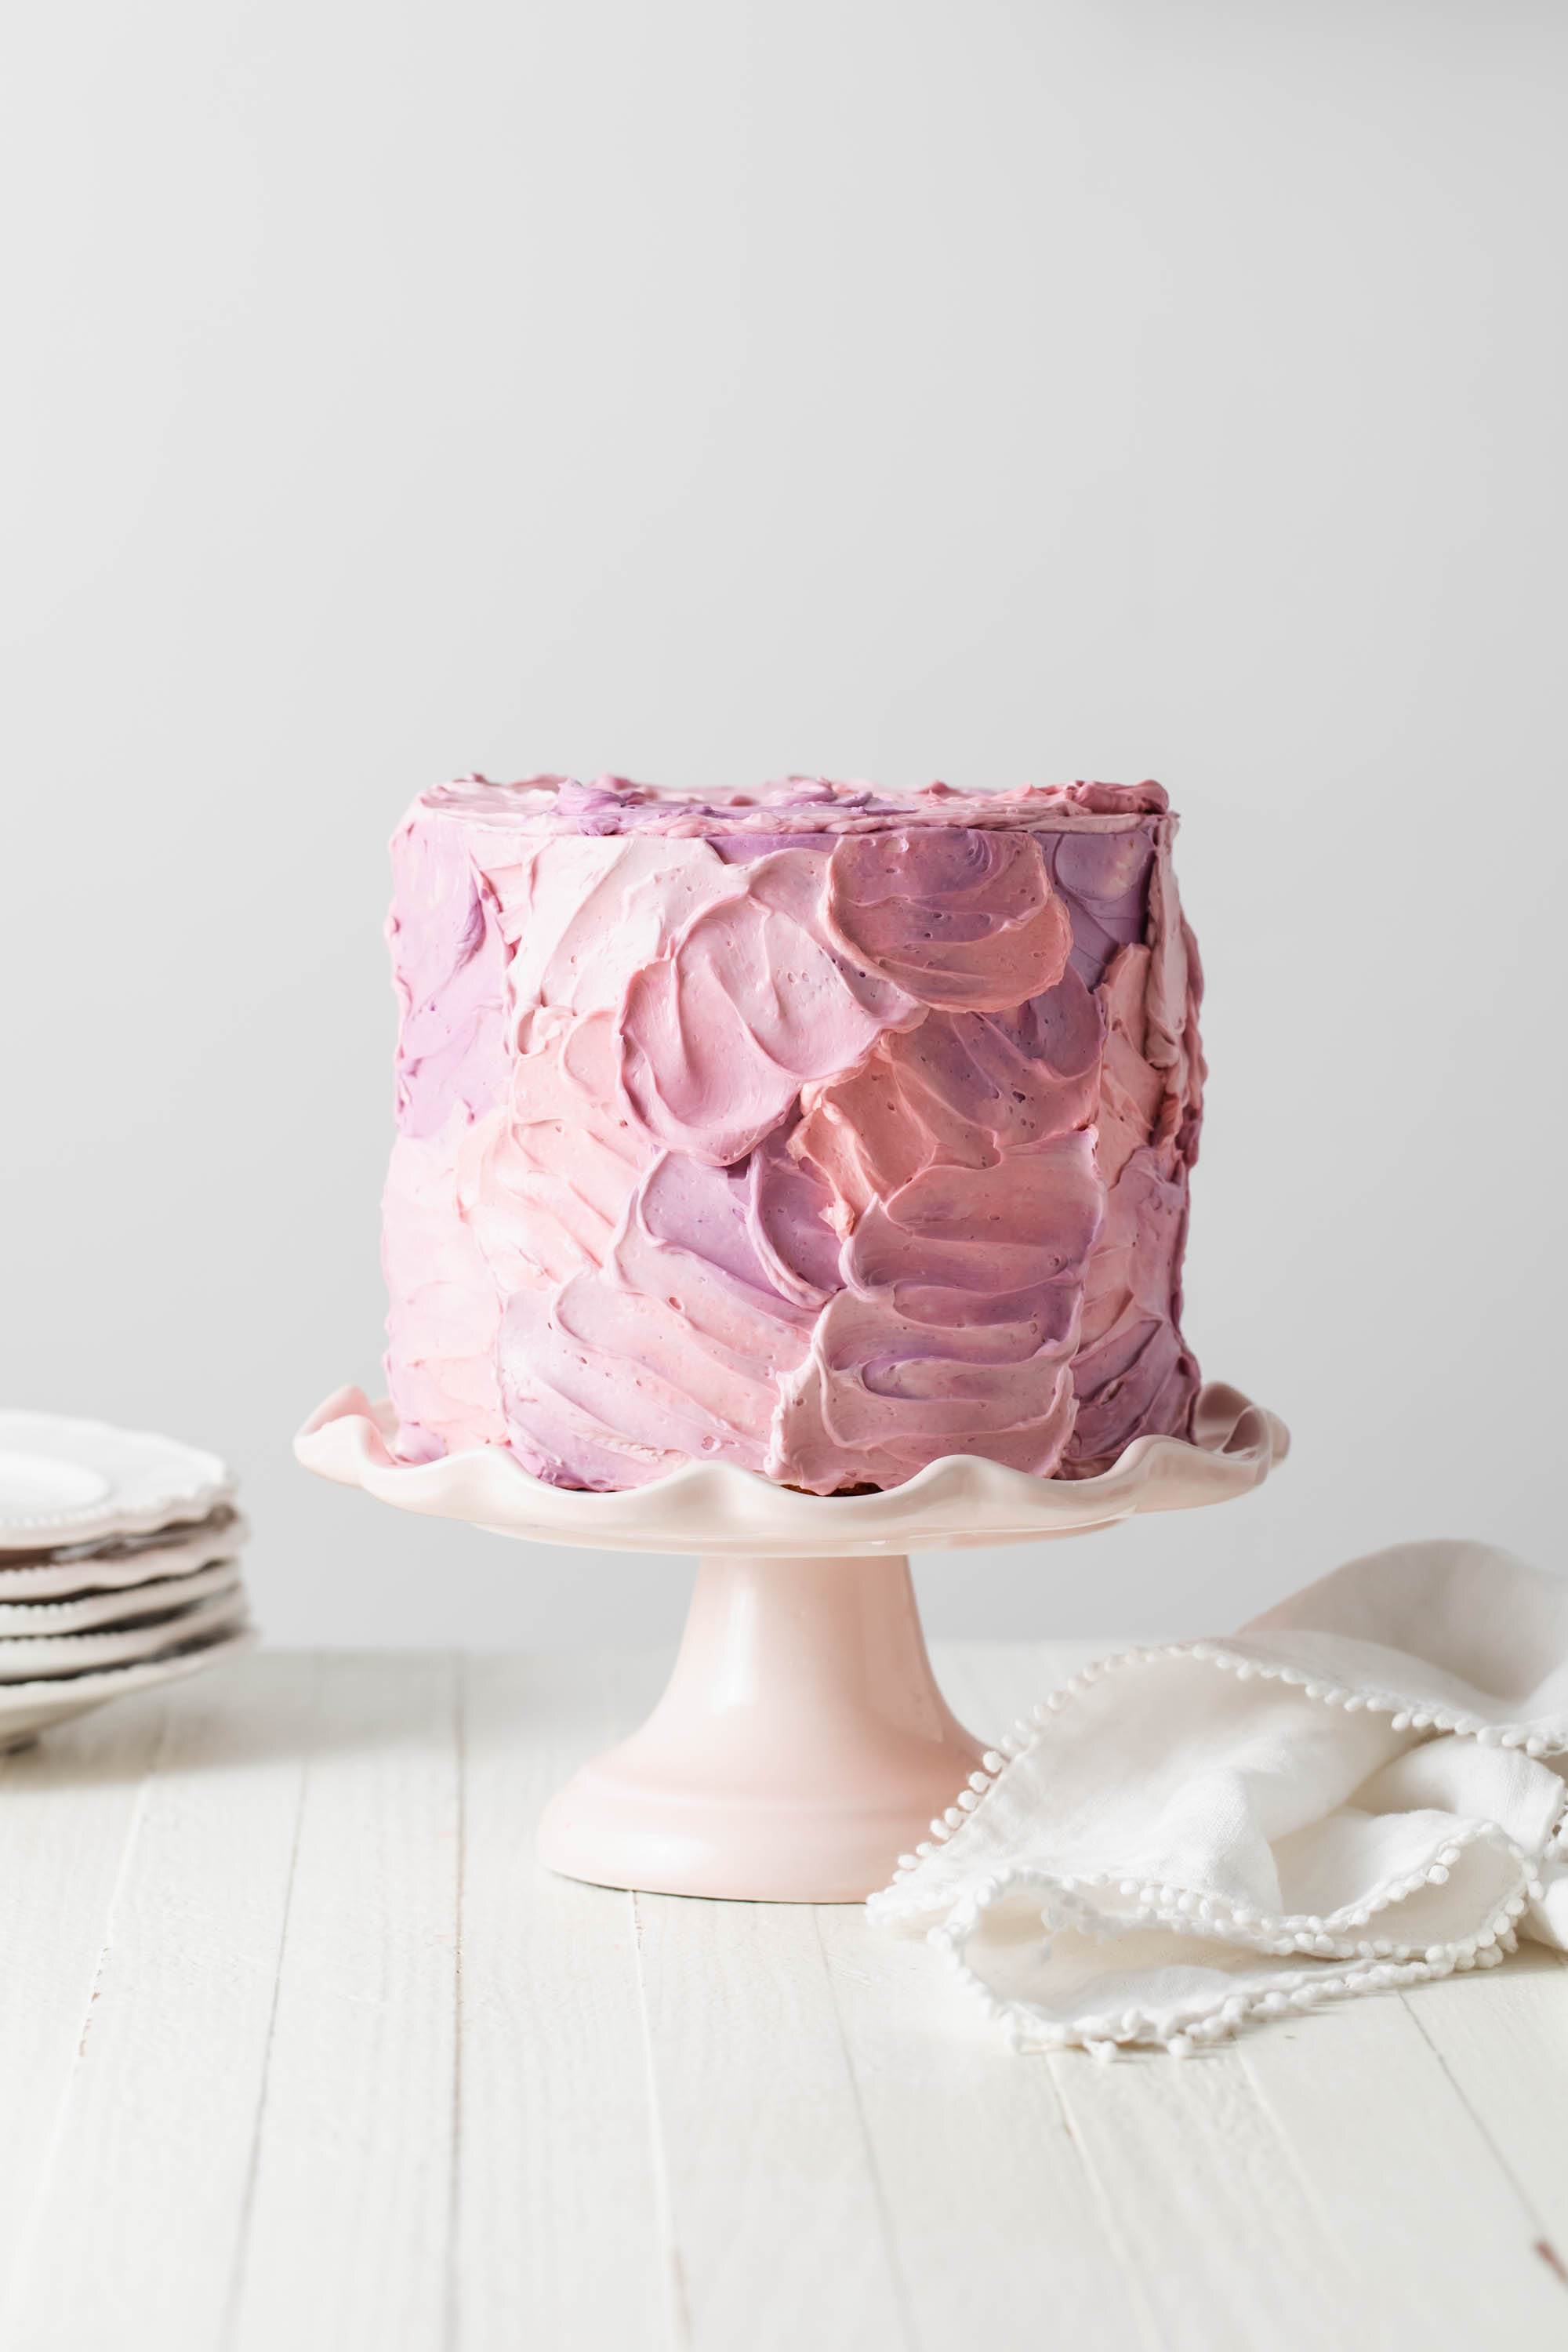 6-inch Blackberry Lavender Layer Cake with pink and purple Swiss meringue buttercream